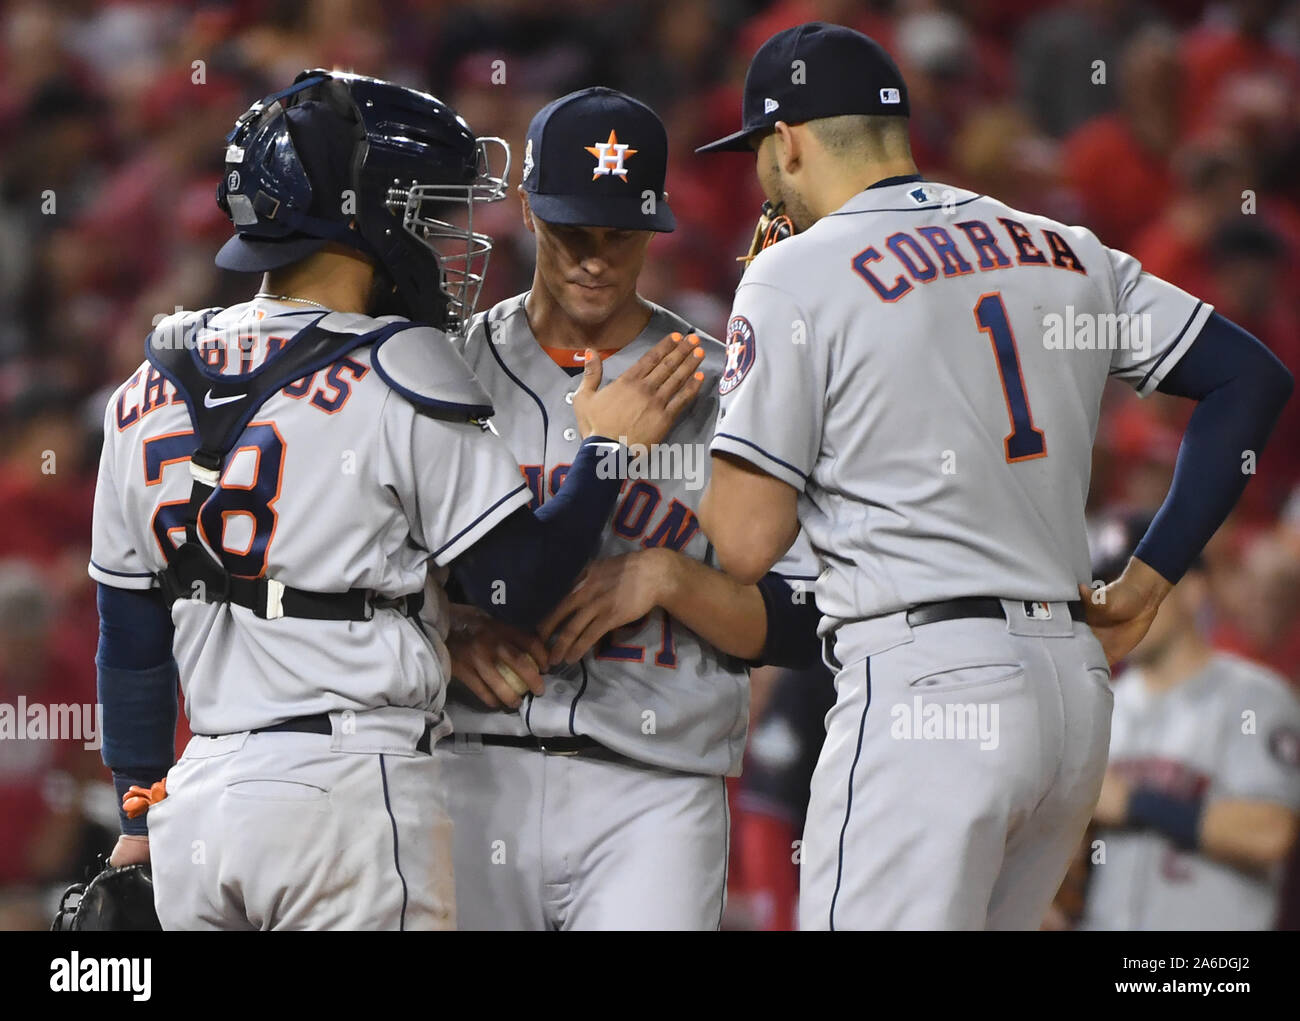 Washington, United States. 25th Oct, 2019. Washington Nationals catcher Robinson Chirinos (L) and Carlos Correa talk to opening pitcher Anibal Sanchez during Game 3 of the 2019 World Series against the Houston Astros at Nationals Park in Washington, DC on Friday, October 25, 2019. Washington leads the best-of-seven series 2-0. Photo by Kevin Dietsch/UPI Credit: UPI/Alamy Live News Stock Photo